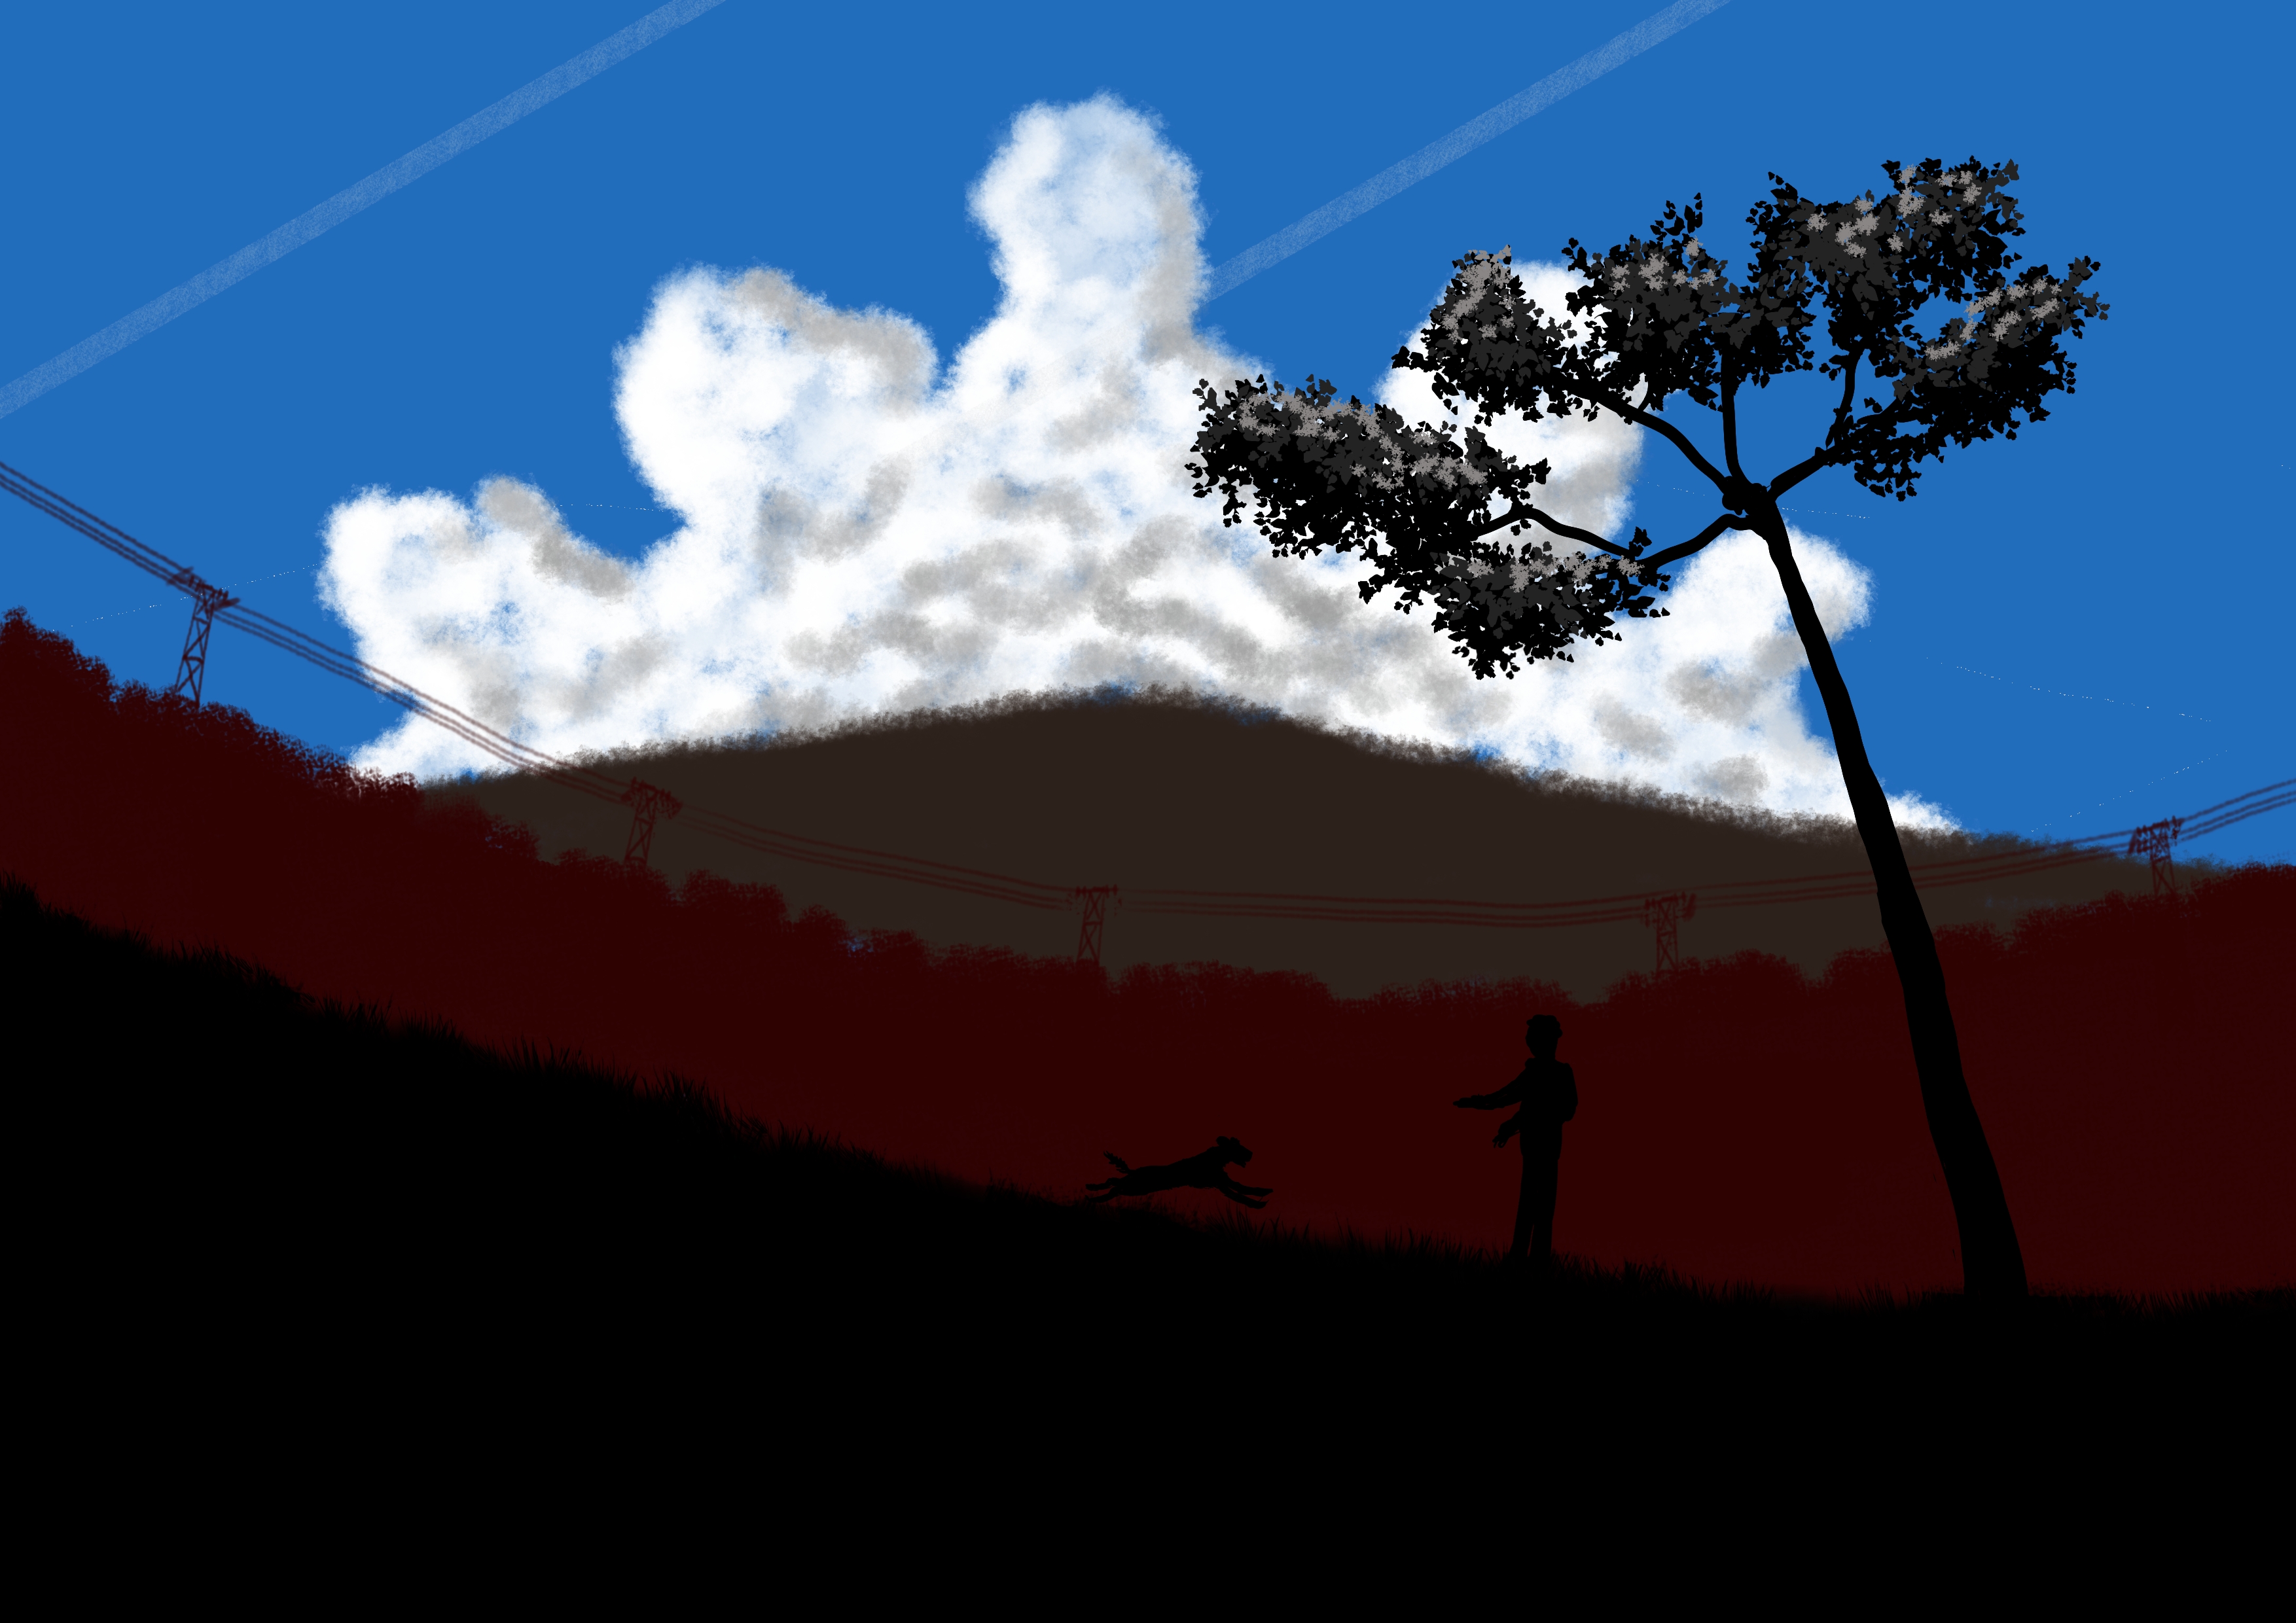 General 3508x2480 dog mountains trees clouds high voltage tower forest